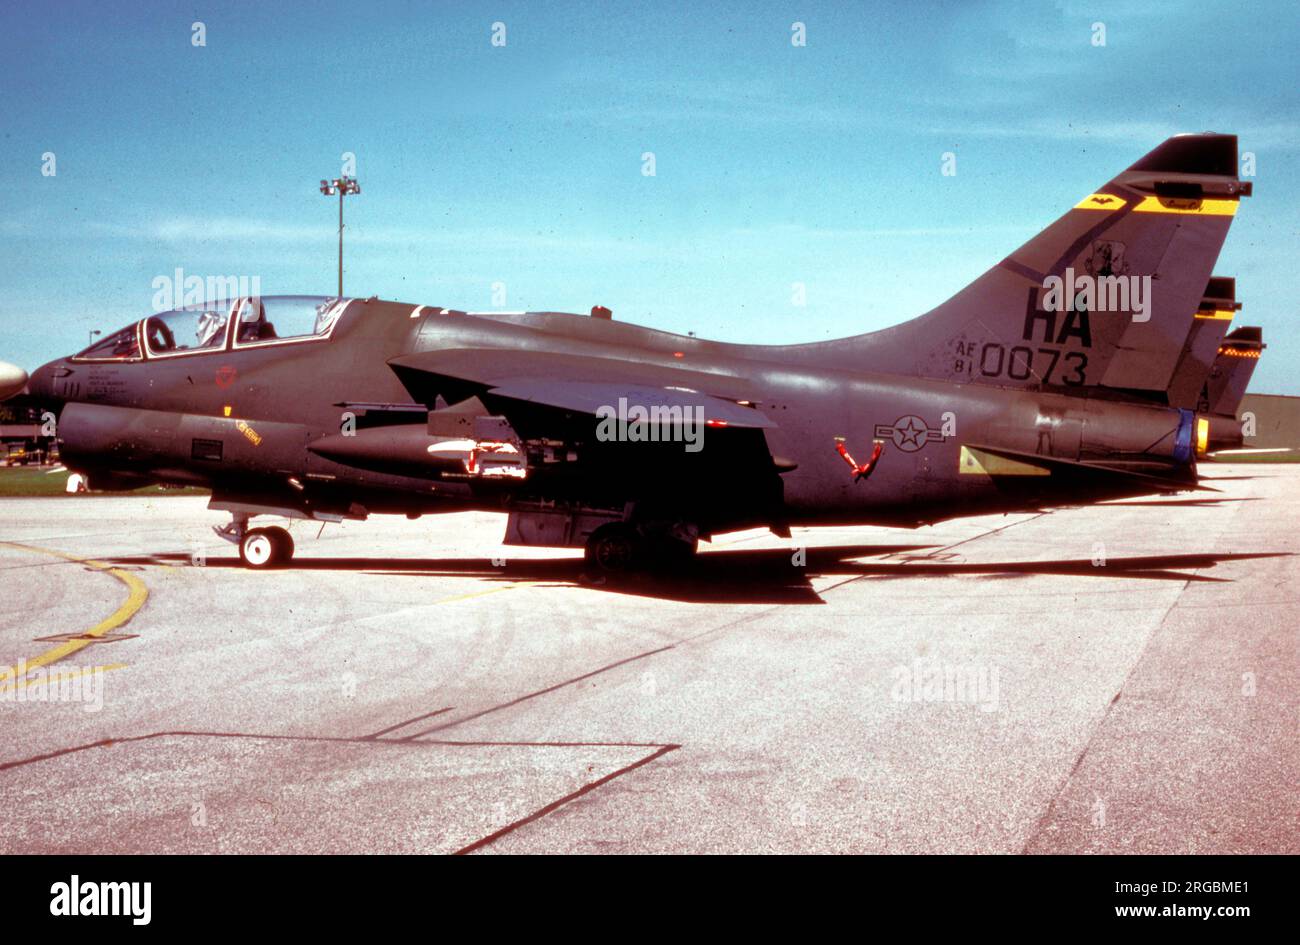 United States Air Force (USAF) - Ling-Temco-Vought A-7K Corsair II 81-0073 (MSN K-026, Basiscode 'HA'), iowa ANG, 174. TFS (185. TFW), mit Sitz in Sioux City, IA. Stockfoto